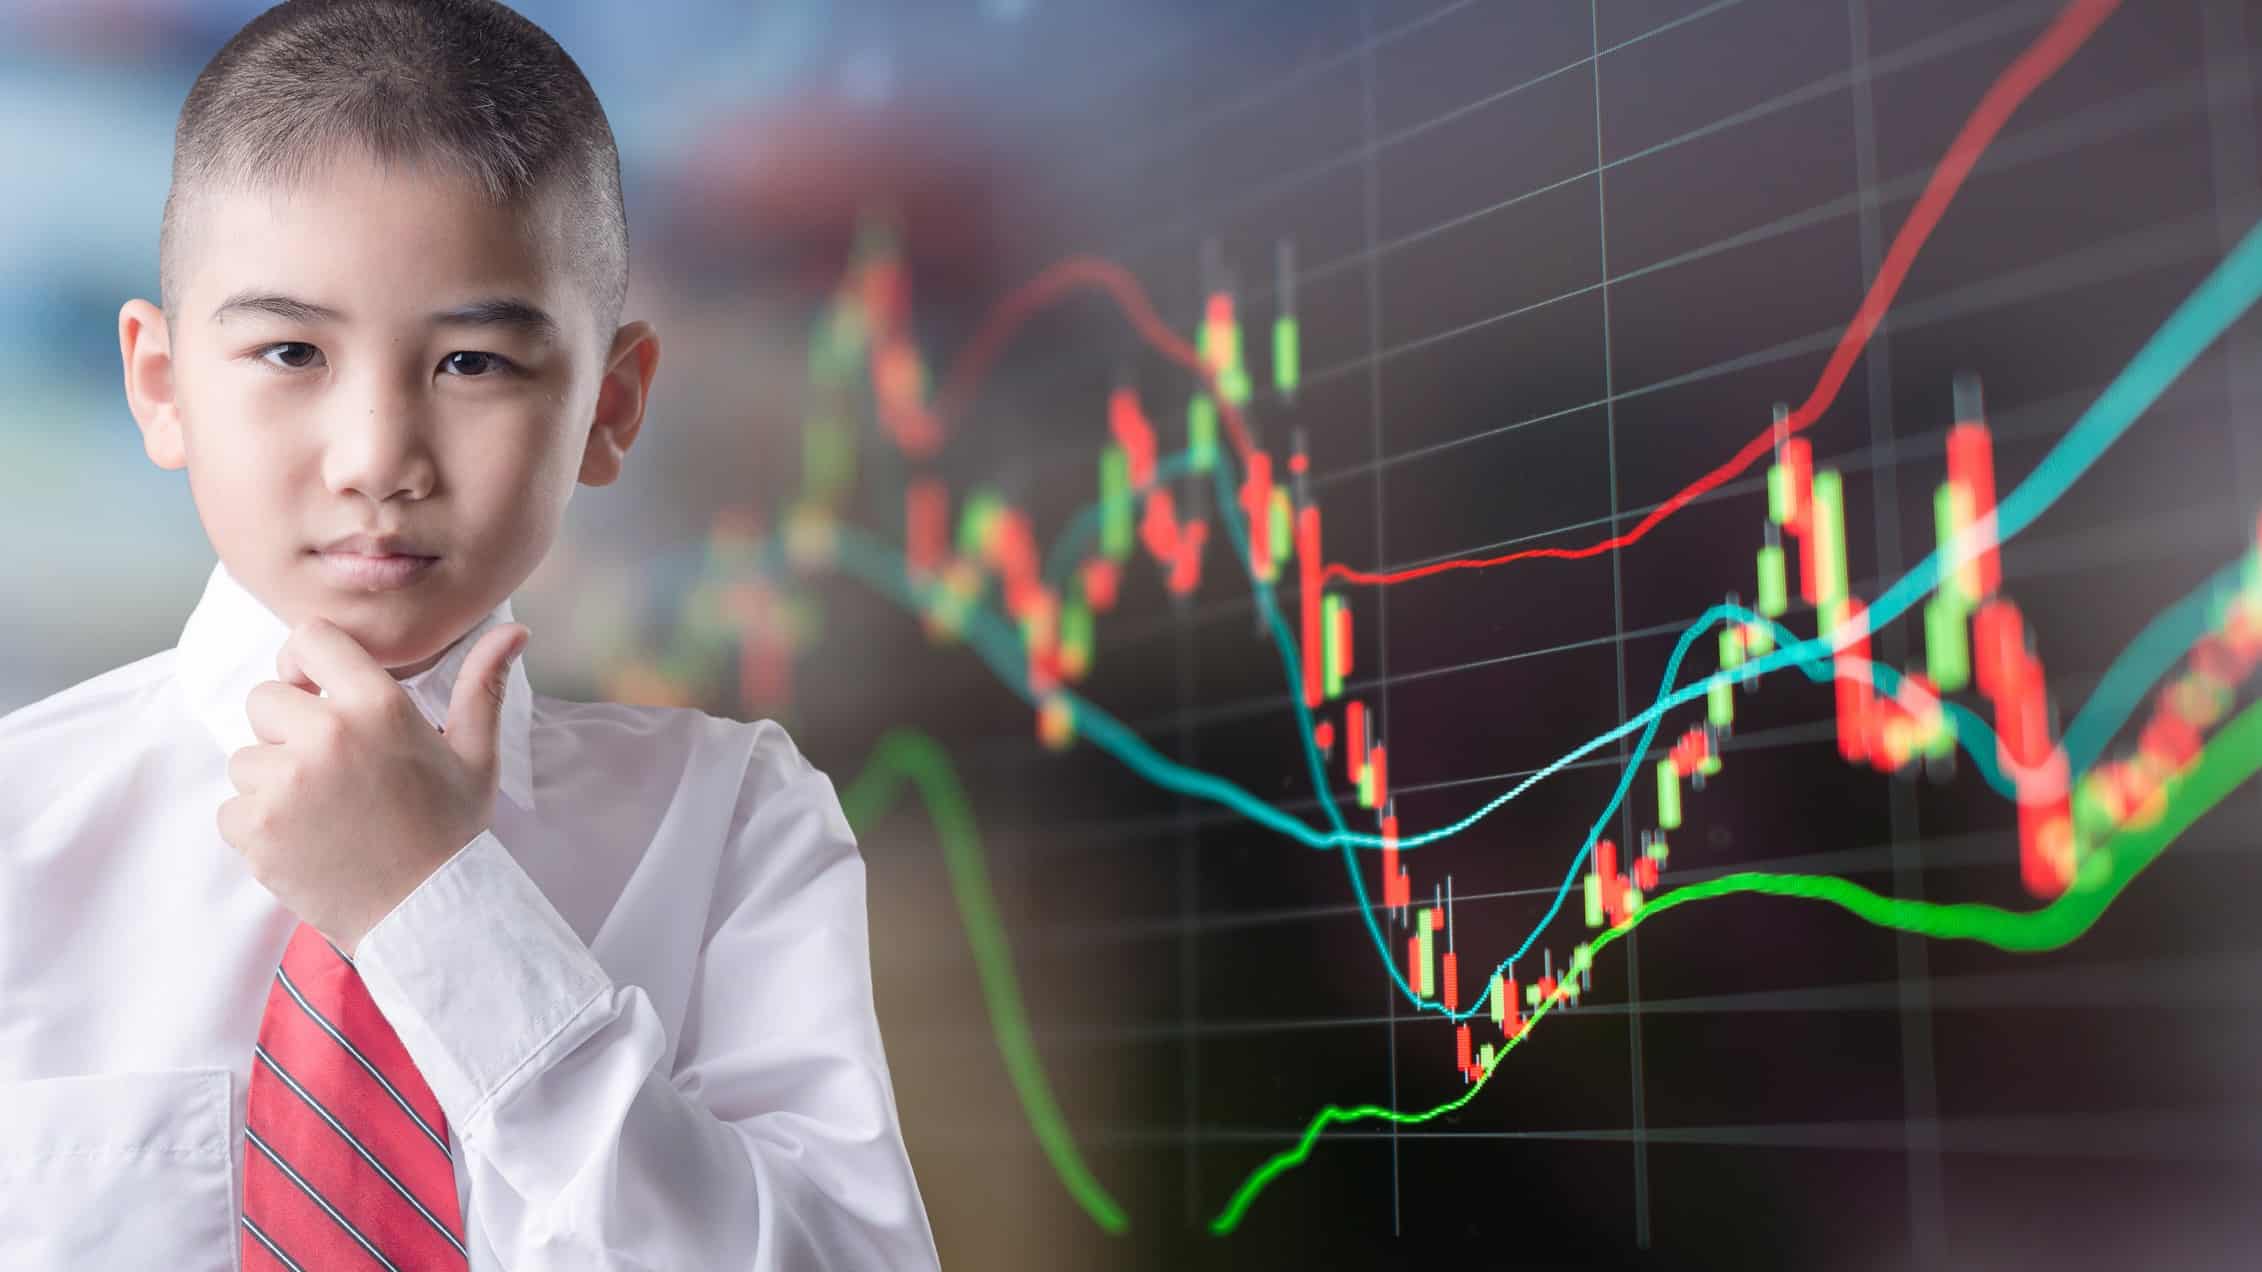 Boy looks quizzical standing in front of a graph.